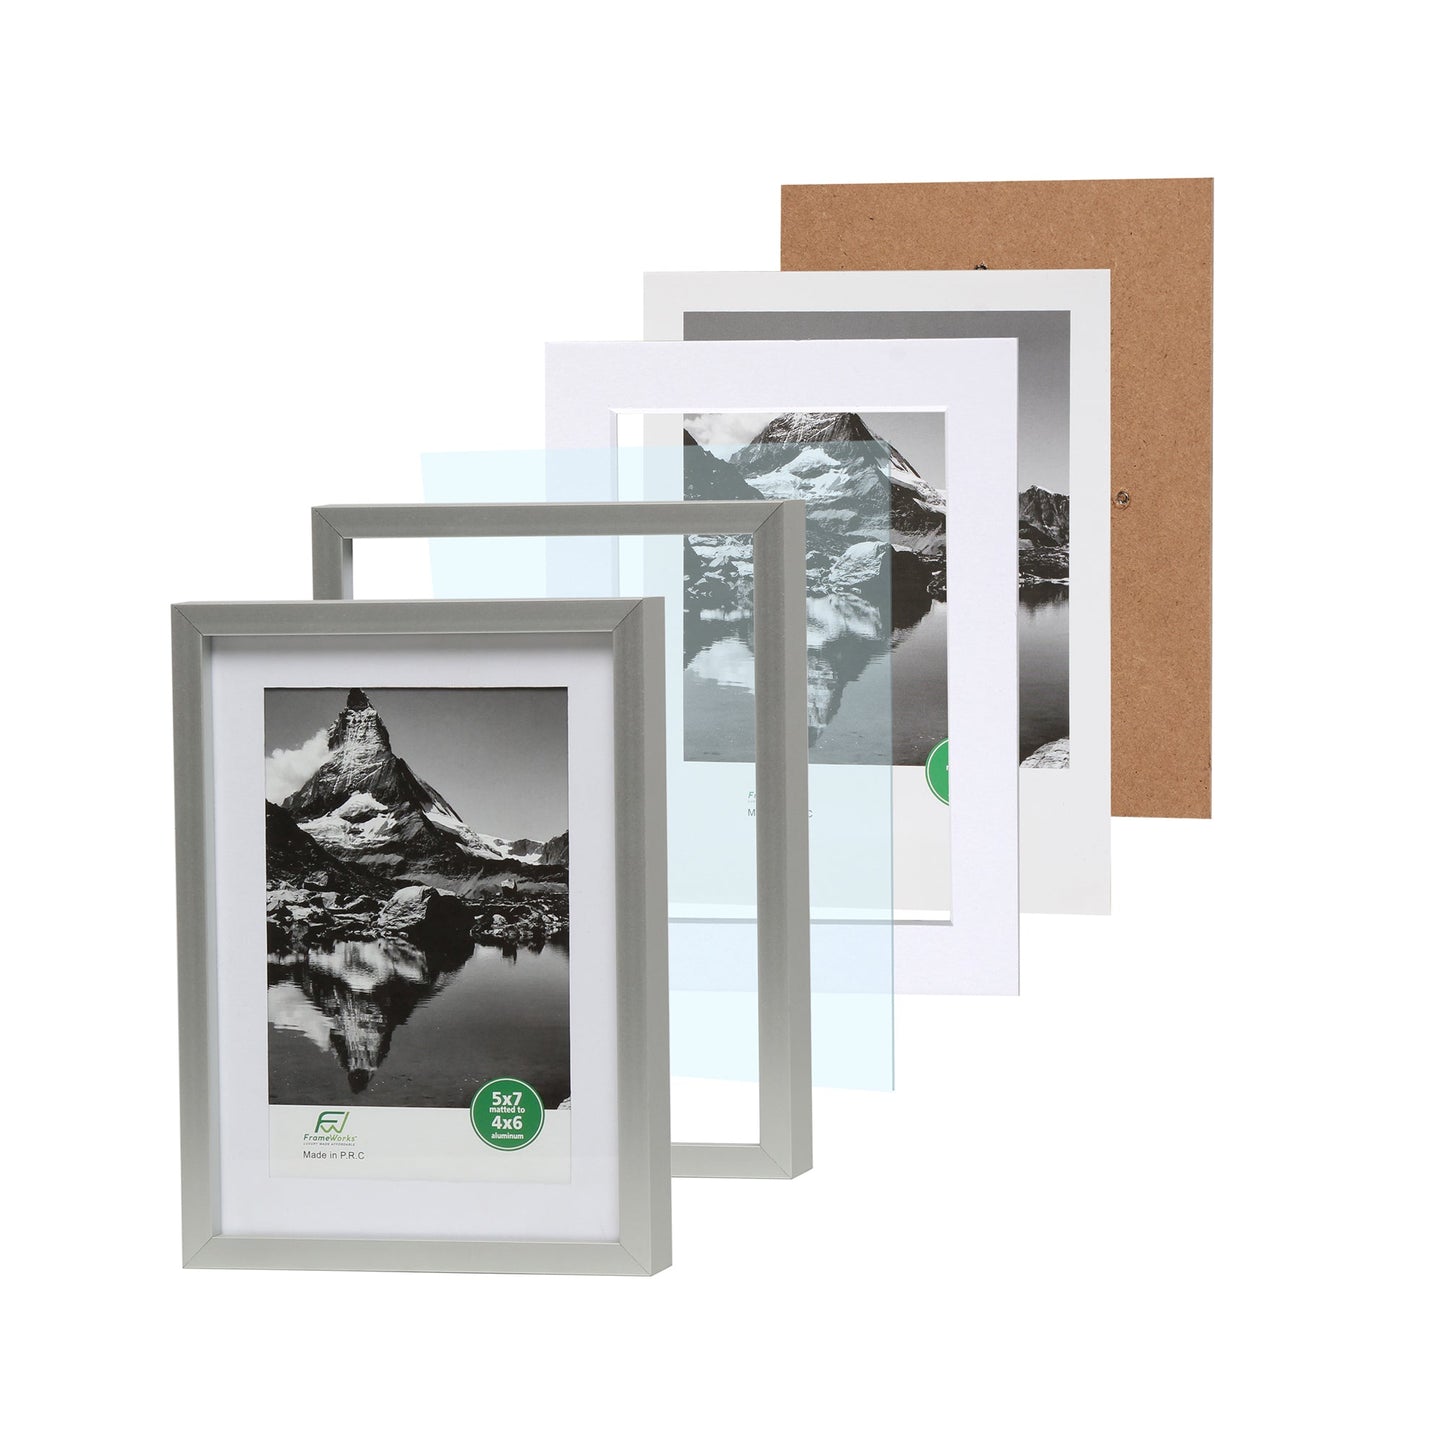 5" x 7" Deluxe Silver Aluminum Contemporary Picture Frame, 4" x 6" Matted